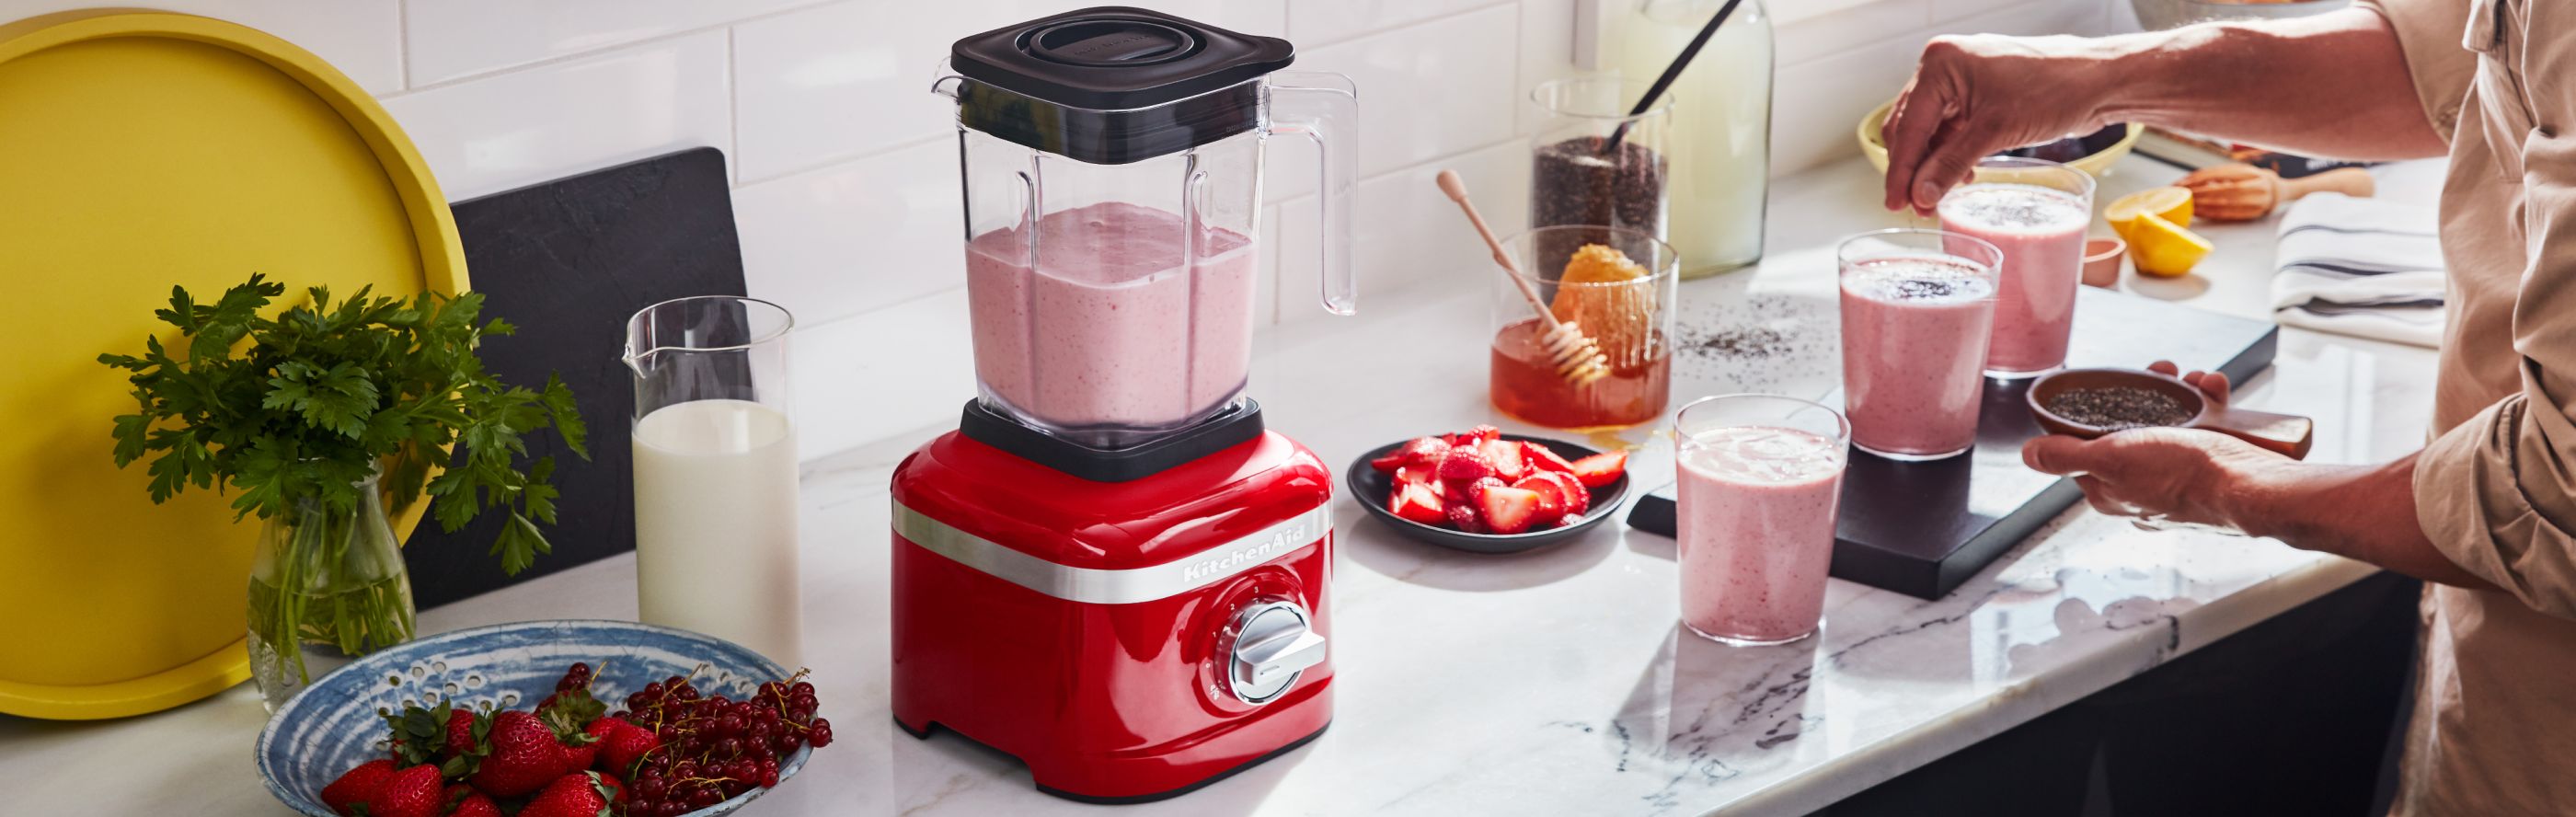 Person preparing strawberry milkshakes with a red blender